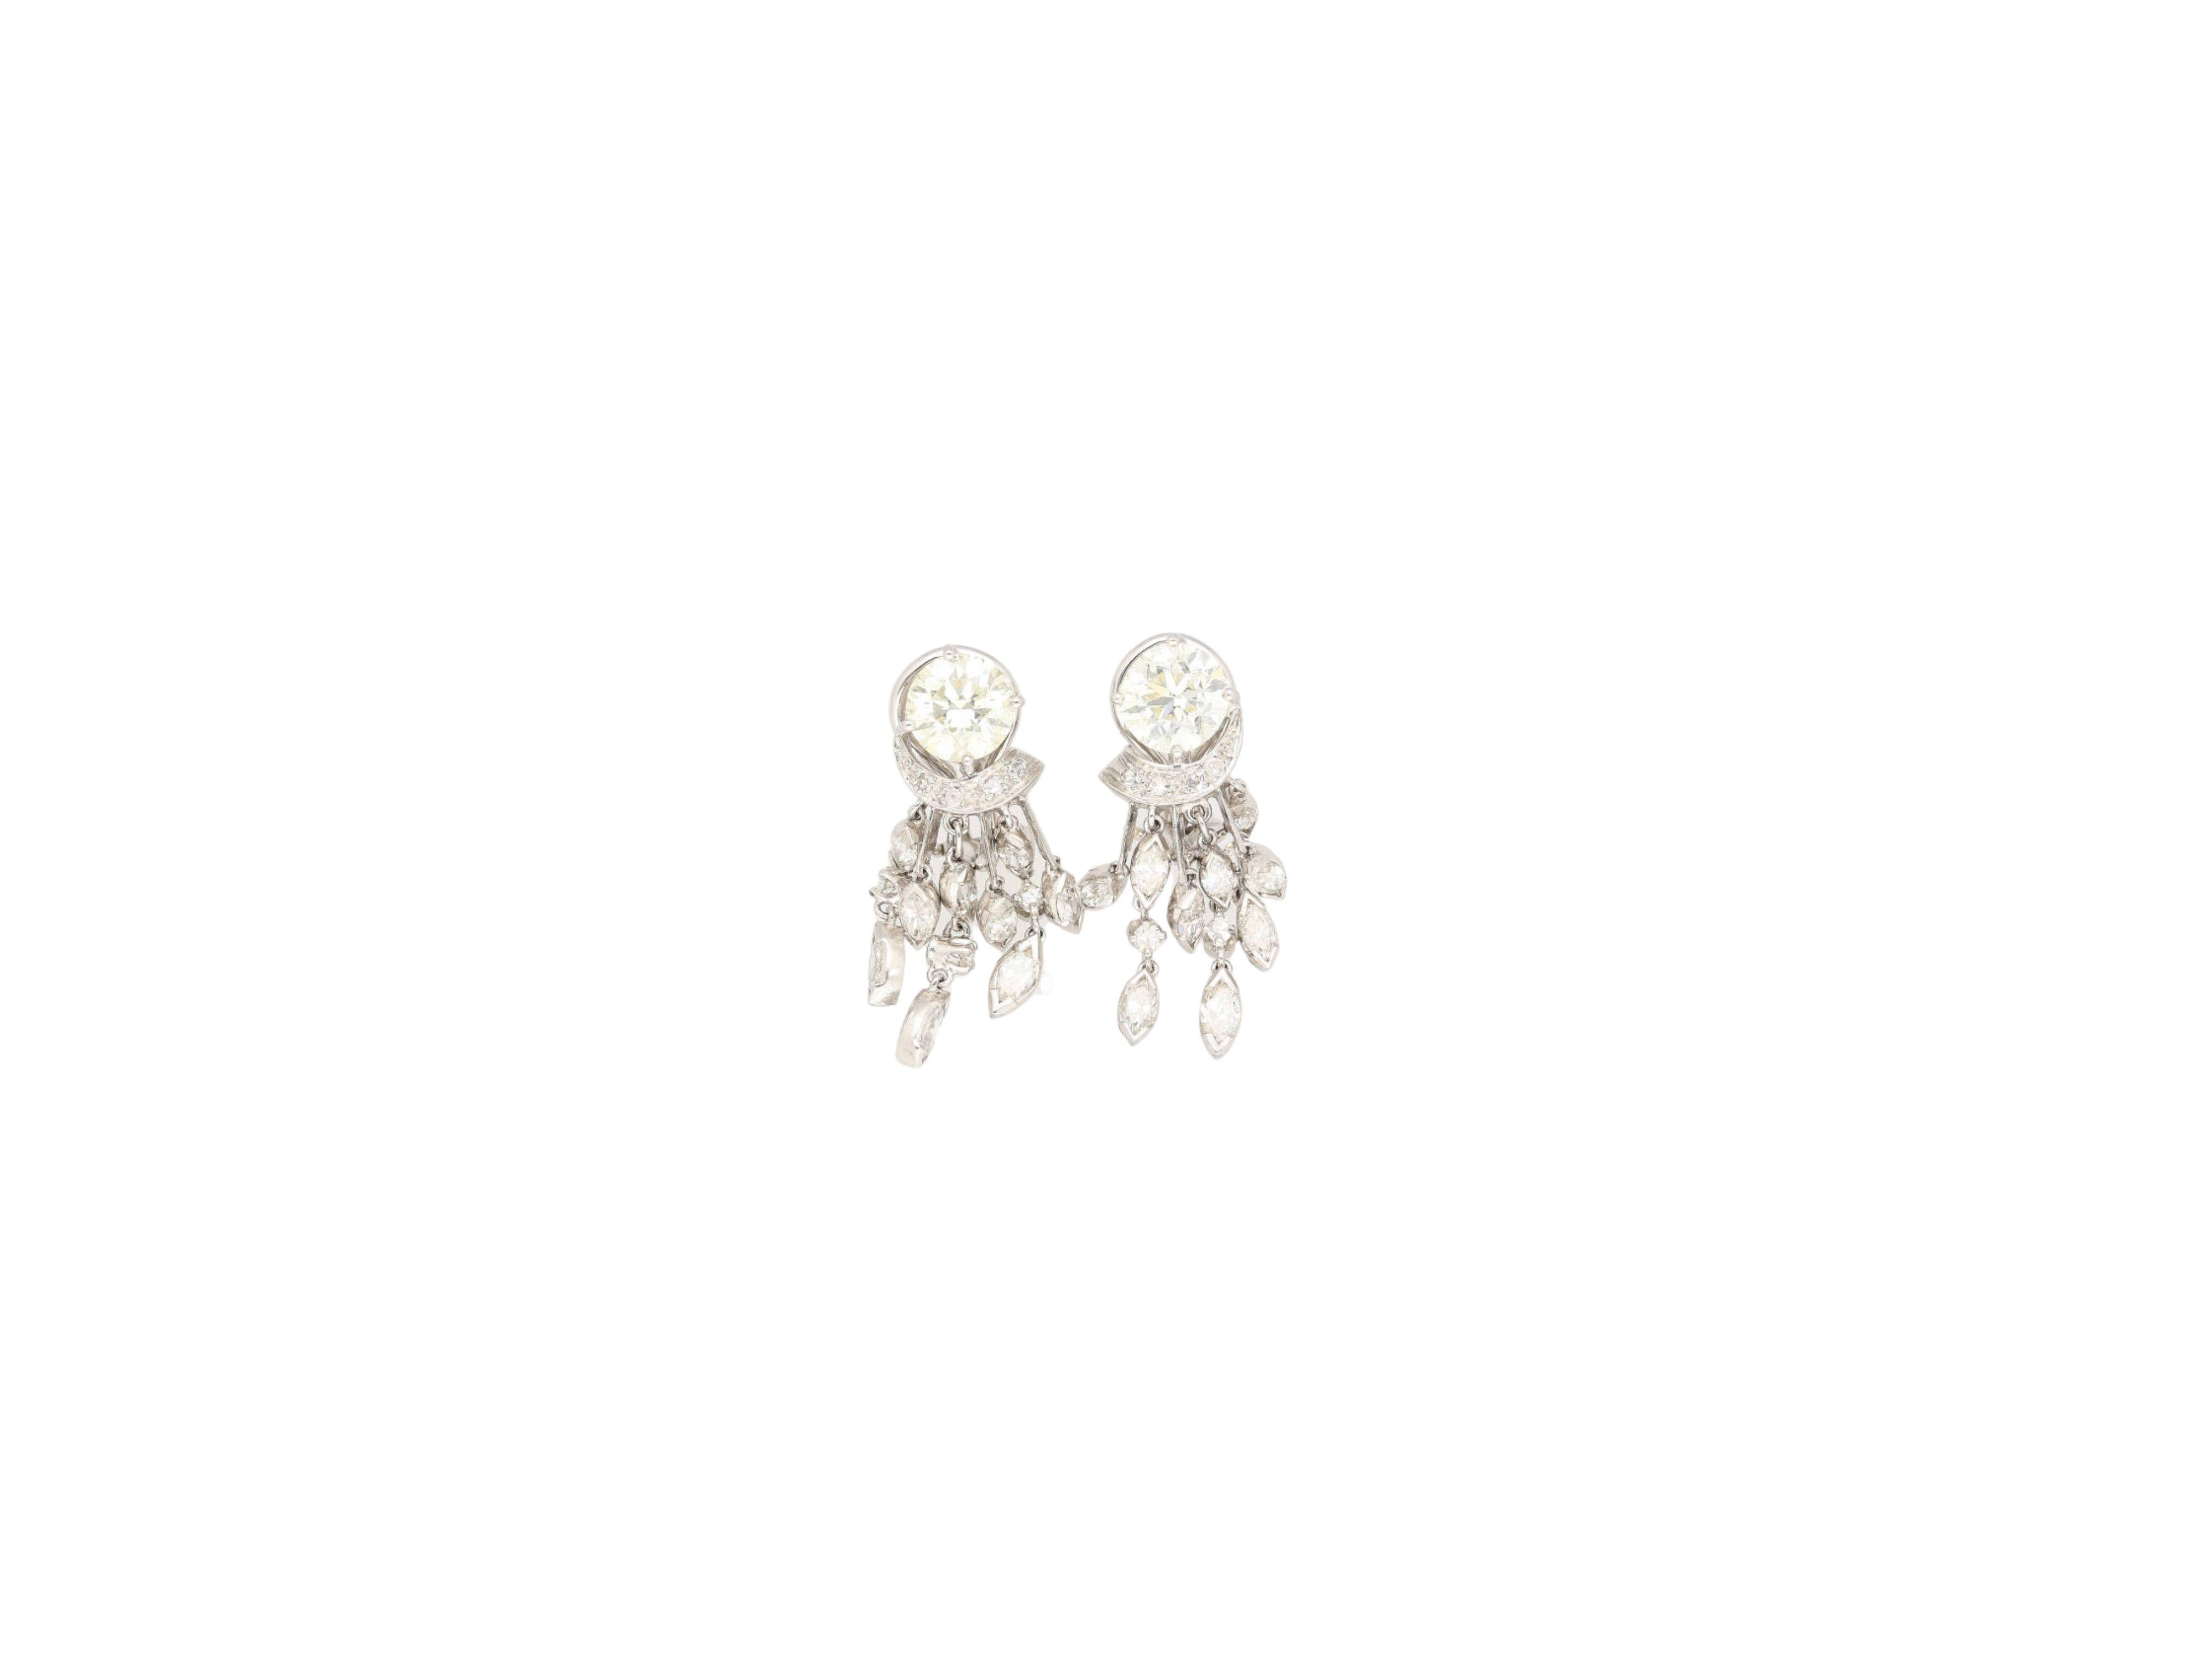 Introducing our exquisite 18k white gold chandelier earrings, featuring a total of 3 carat natural diamonds. The earrings boast two 7.1mm round cut diamonds on top, with cascading chains of marquise and round cut diamonds for a truly distinctive and